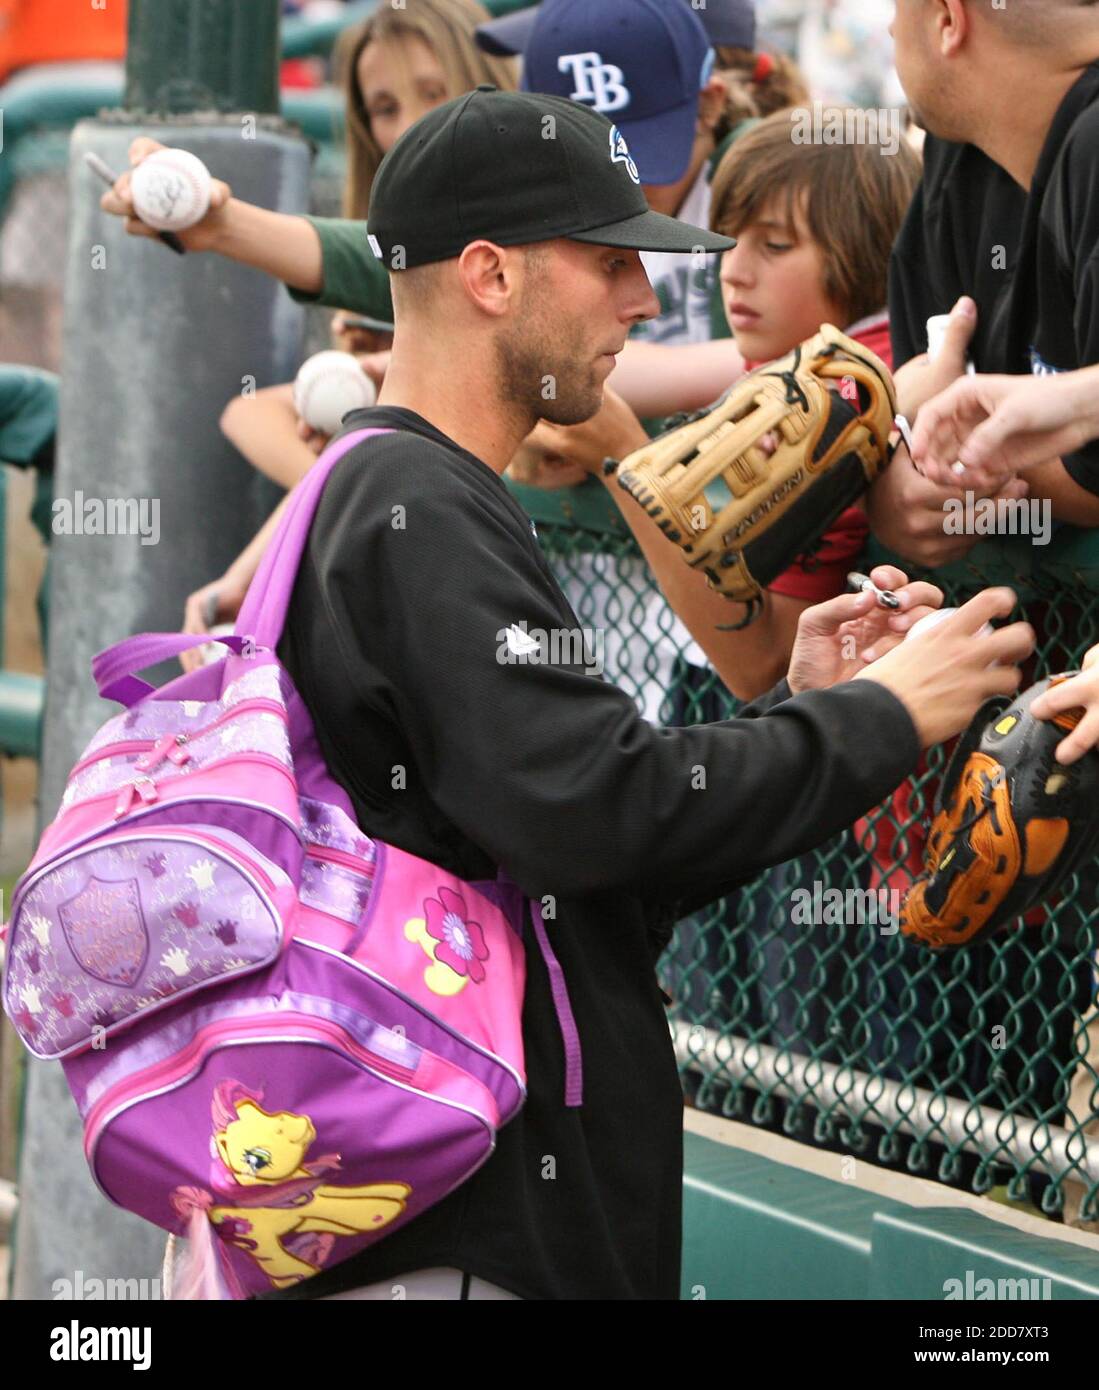 NO FILM, NO VIDEO, NO TV, NO DOCUMENTARY - Wearing a bright pink 'My Little Pony' backpack, Toronto Blue Jays pitcher Jesse Carlson signs autographs before the start of the Blue Jays' game against the Tampa Bay Devil Rays at Champion Stadium at Disney's Wide World of Sports in Lake Buena Vista, FL, USA on April 23, 2008. Photo by Stephen M. Dowell/Orlando Sentinel/MCT/Cameleon/ABACAPRESS.COM Stock Photo